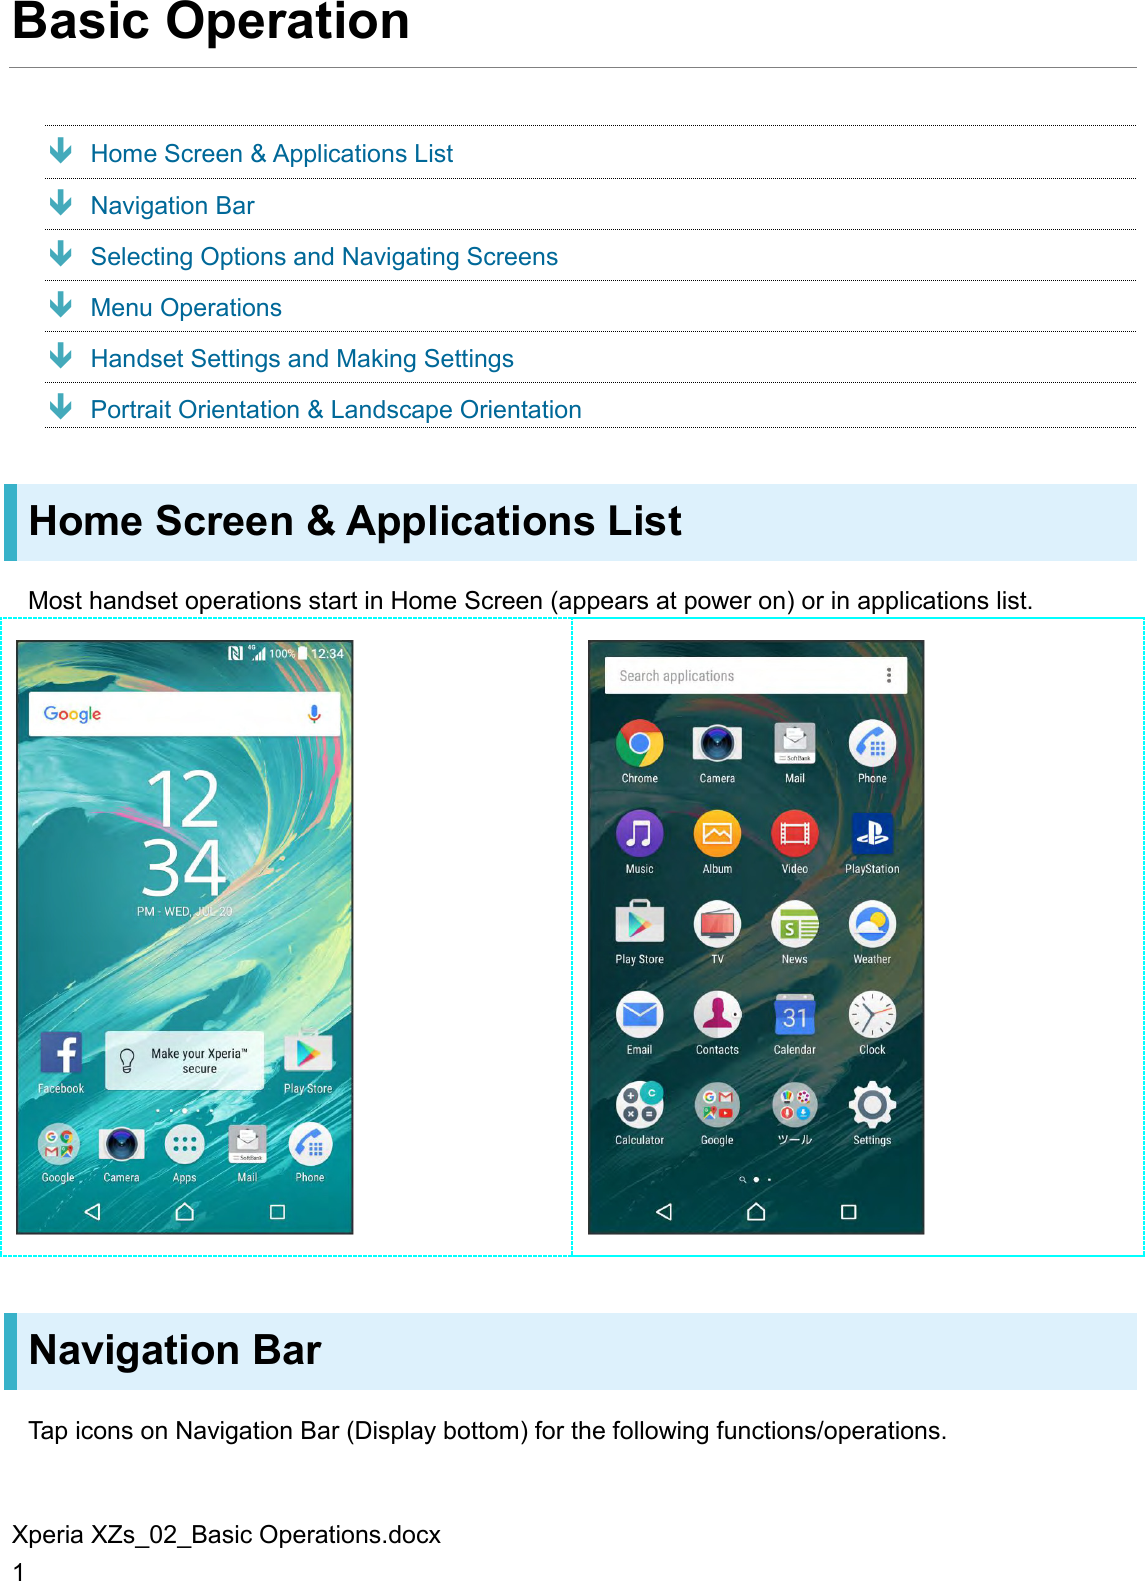 Xperia XZs_02_Basic Operations.docx 1 Basic Operation  Home Screen &amp; Applications List  Navigation Bar  Selecting Options and Navigating Screens  Menu Operations  Handset Settings and Making Settings  Portrait Orientation &amp; Landscape Orientation Home Screen &amp; Applications List Most handset operations start in Home Screen (appears at power on) or in applications list.   Navigation Bar Tap icons on Navigation Bar (Display bottom) for the following functions/operations. 